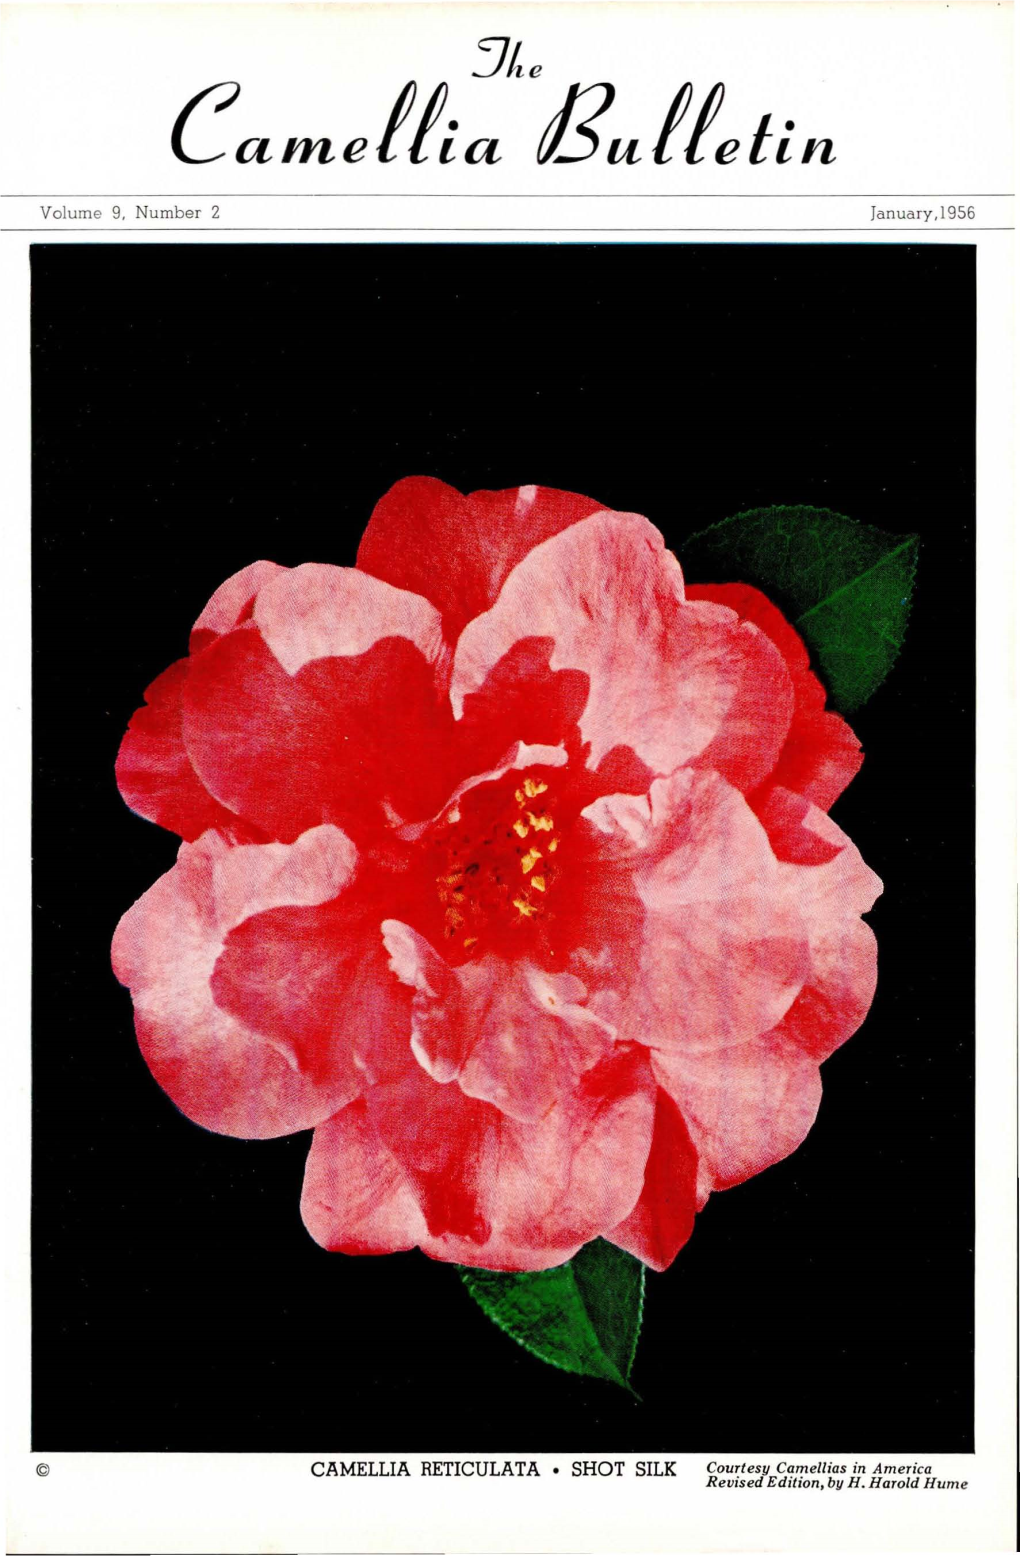 CAMELLIA RETICULATA • SHOT SILK Courtesy Camellias in America Revised Edition, by H, Harold Hume 2 Tbe Camellia Bulletin